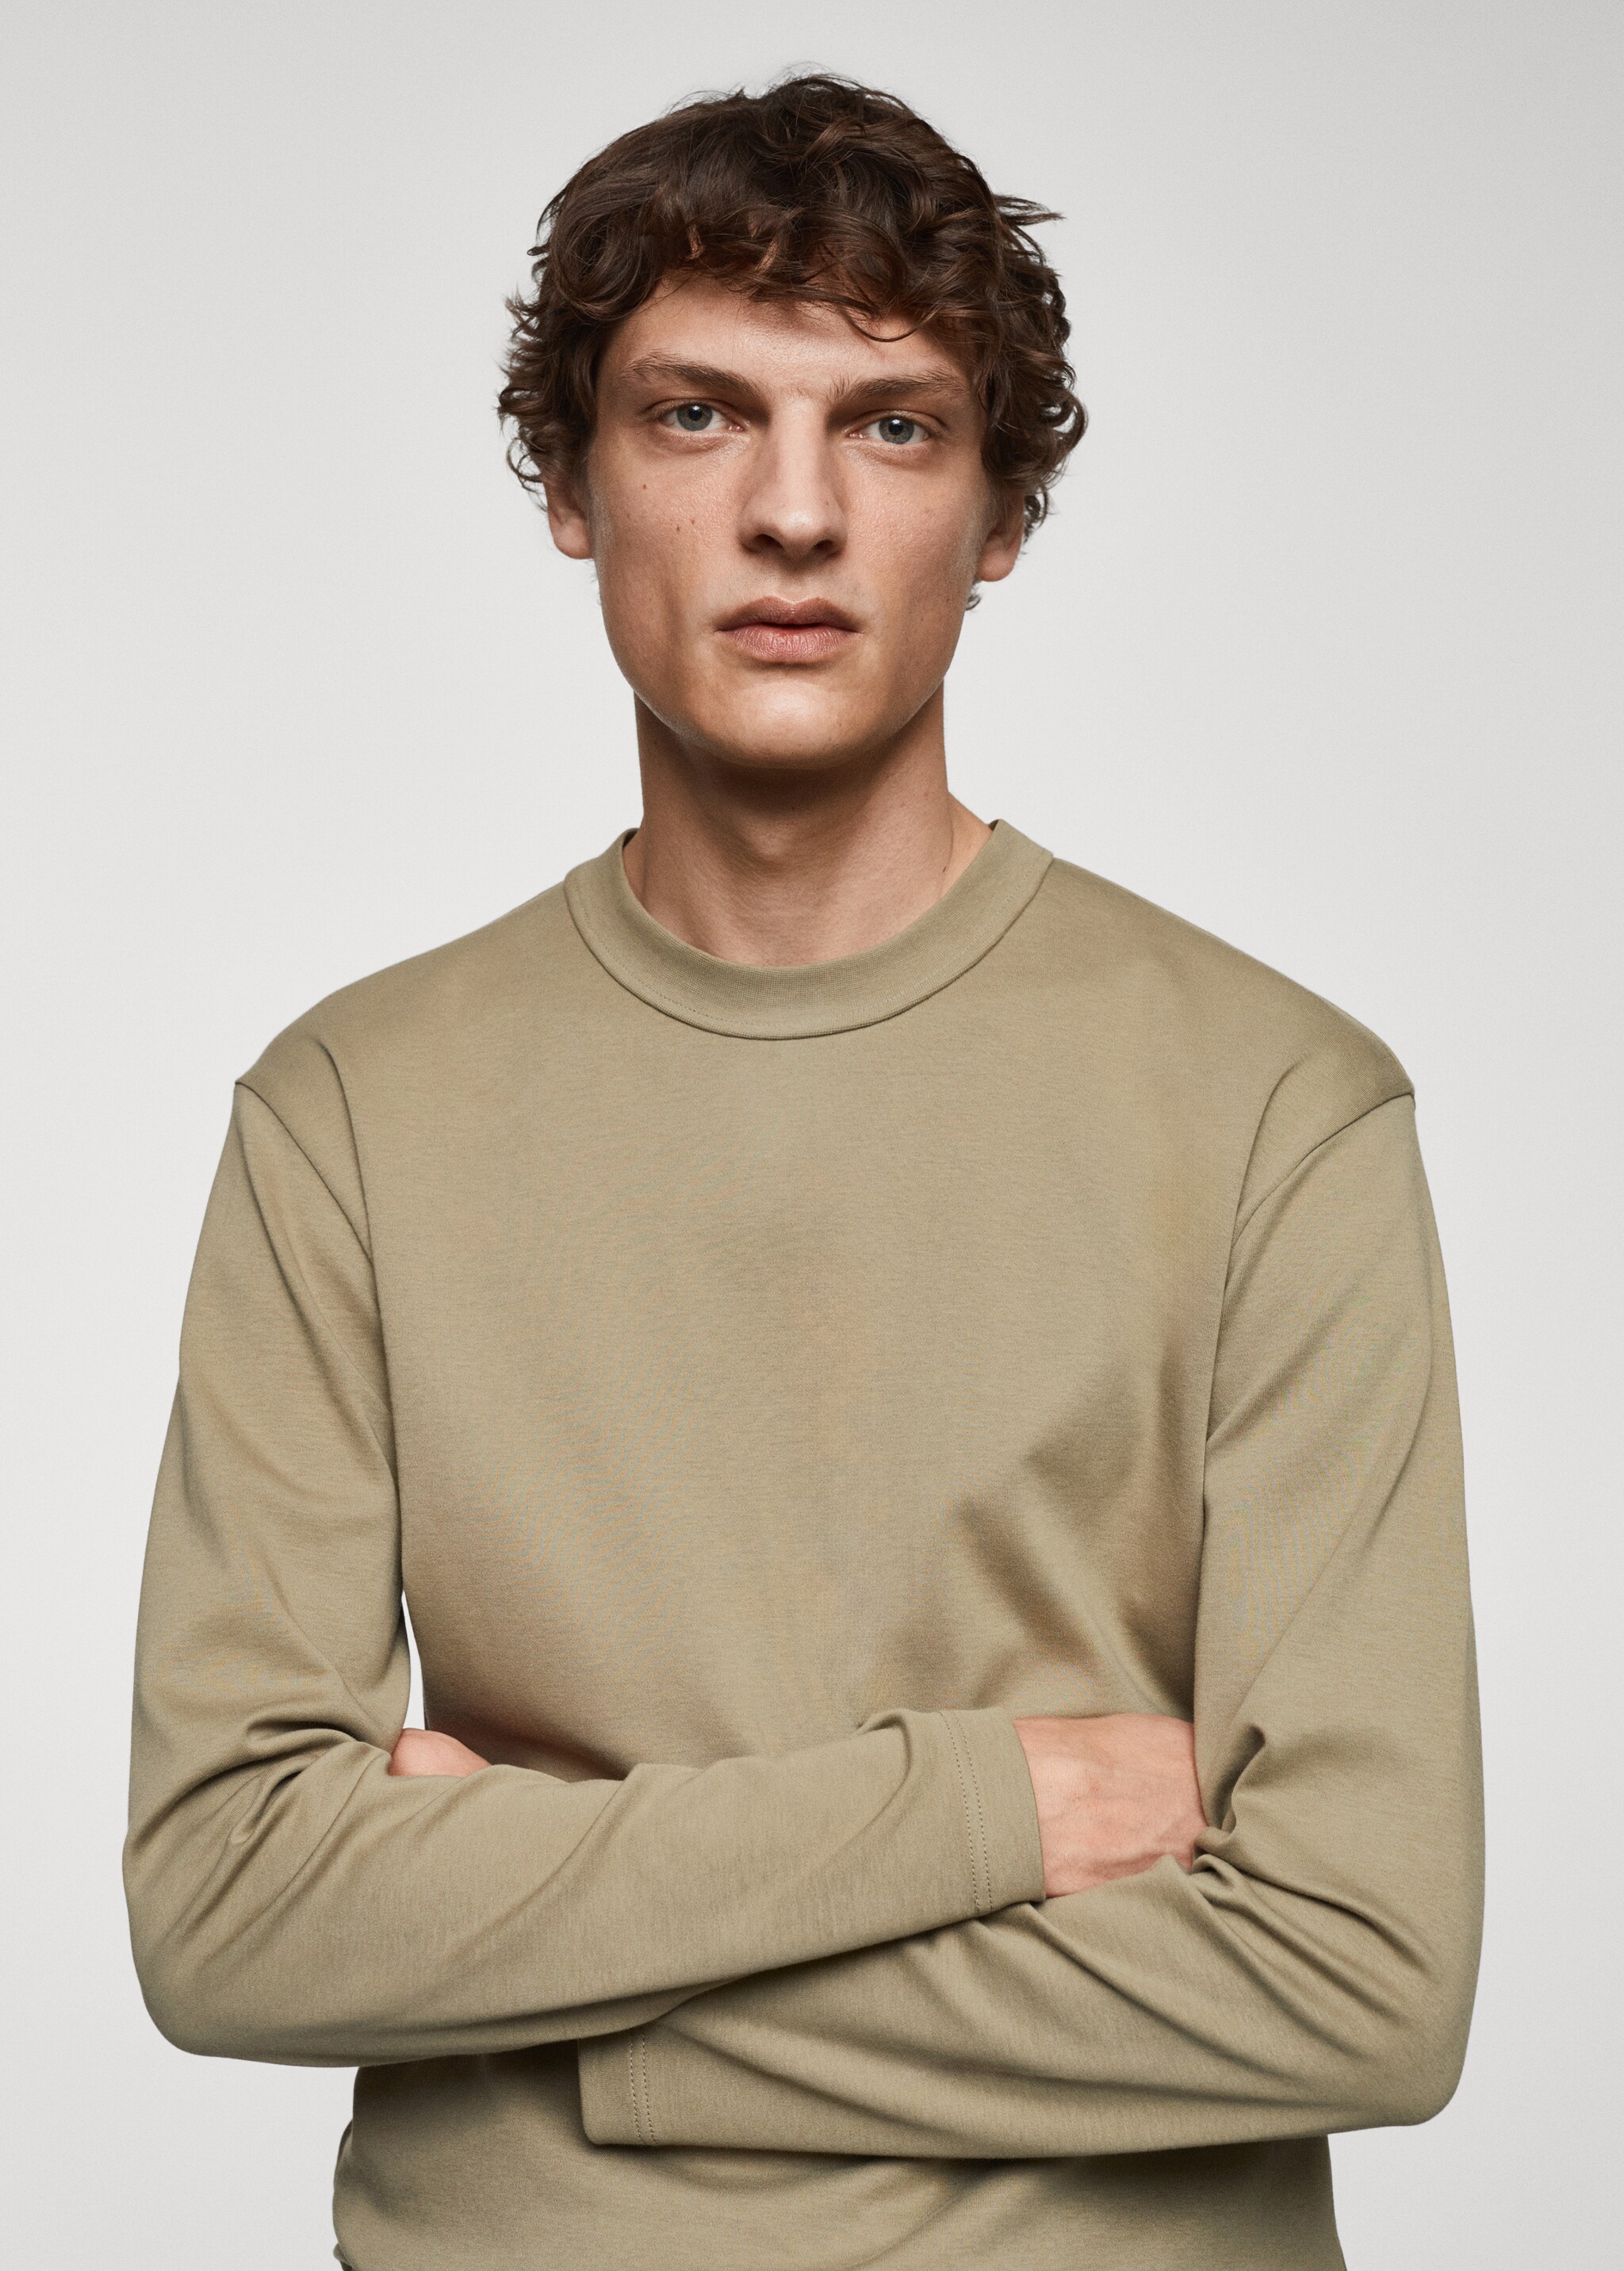 100% cotton long-sleeved t-shirt - Details of the article 1